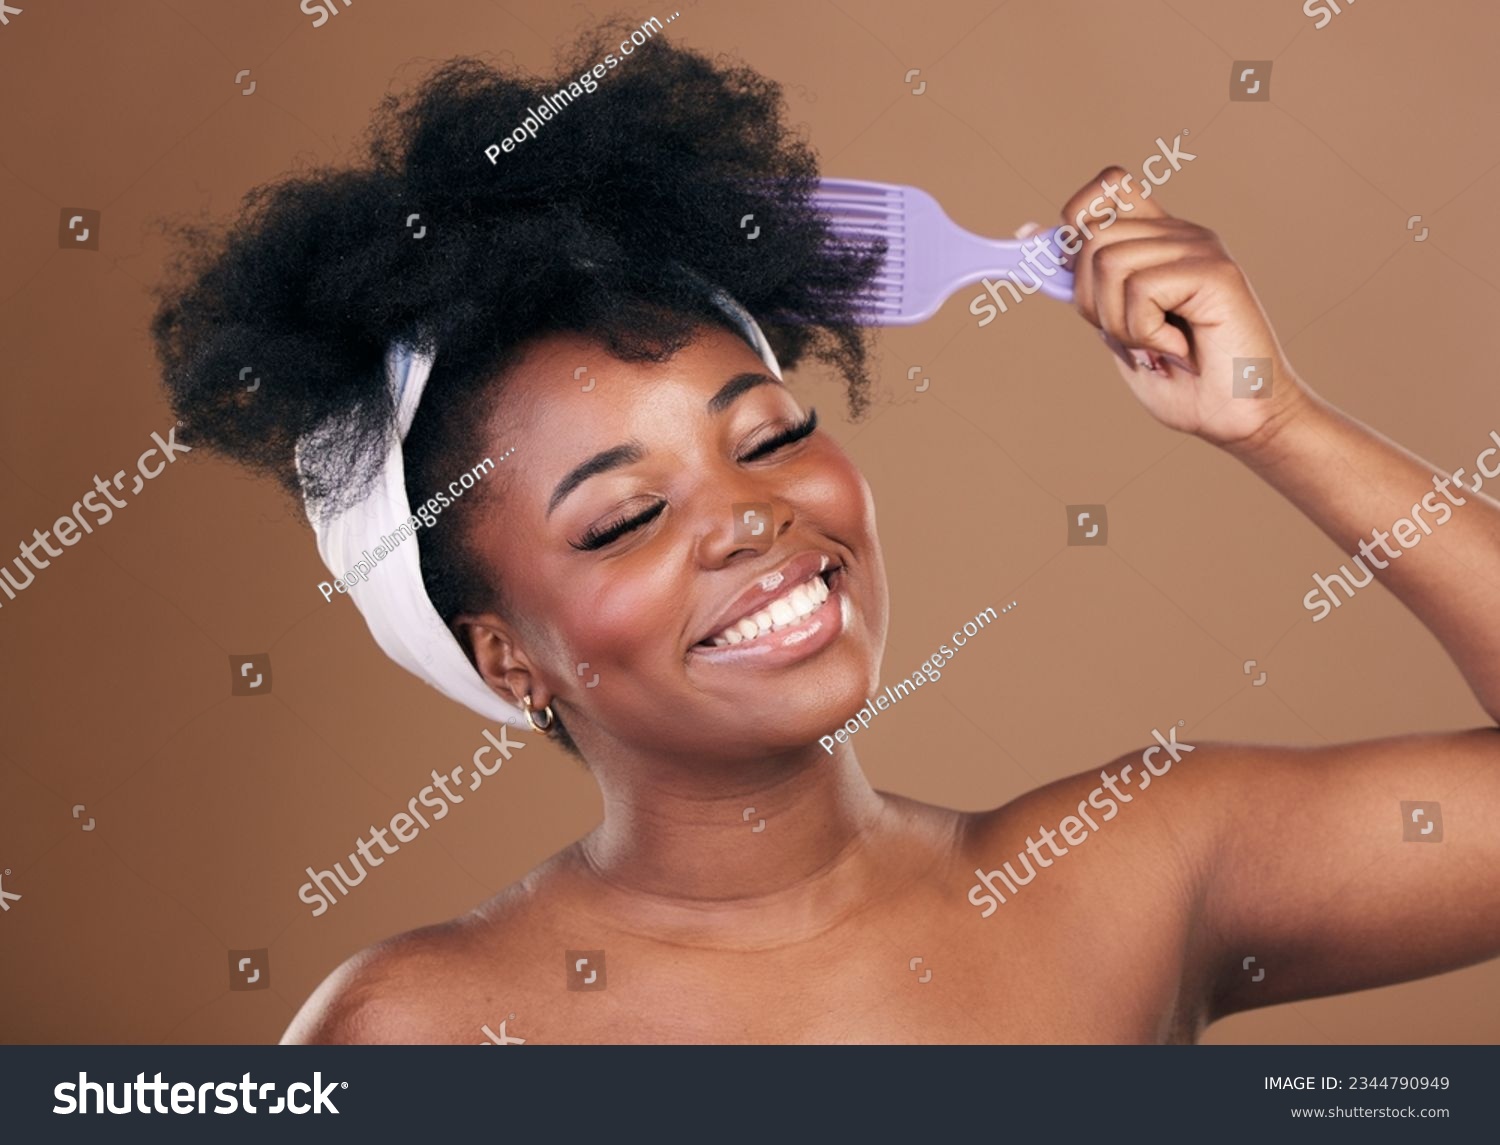 Comb, hair care or happy black woman with afro, self love or smile on a brown studio background. Hairstyle, healthy growth or African model with natural shine or beauty with aesthetic or wellness #2344790949